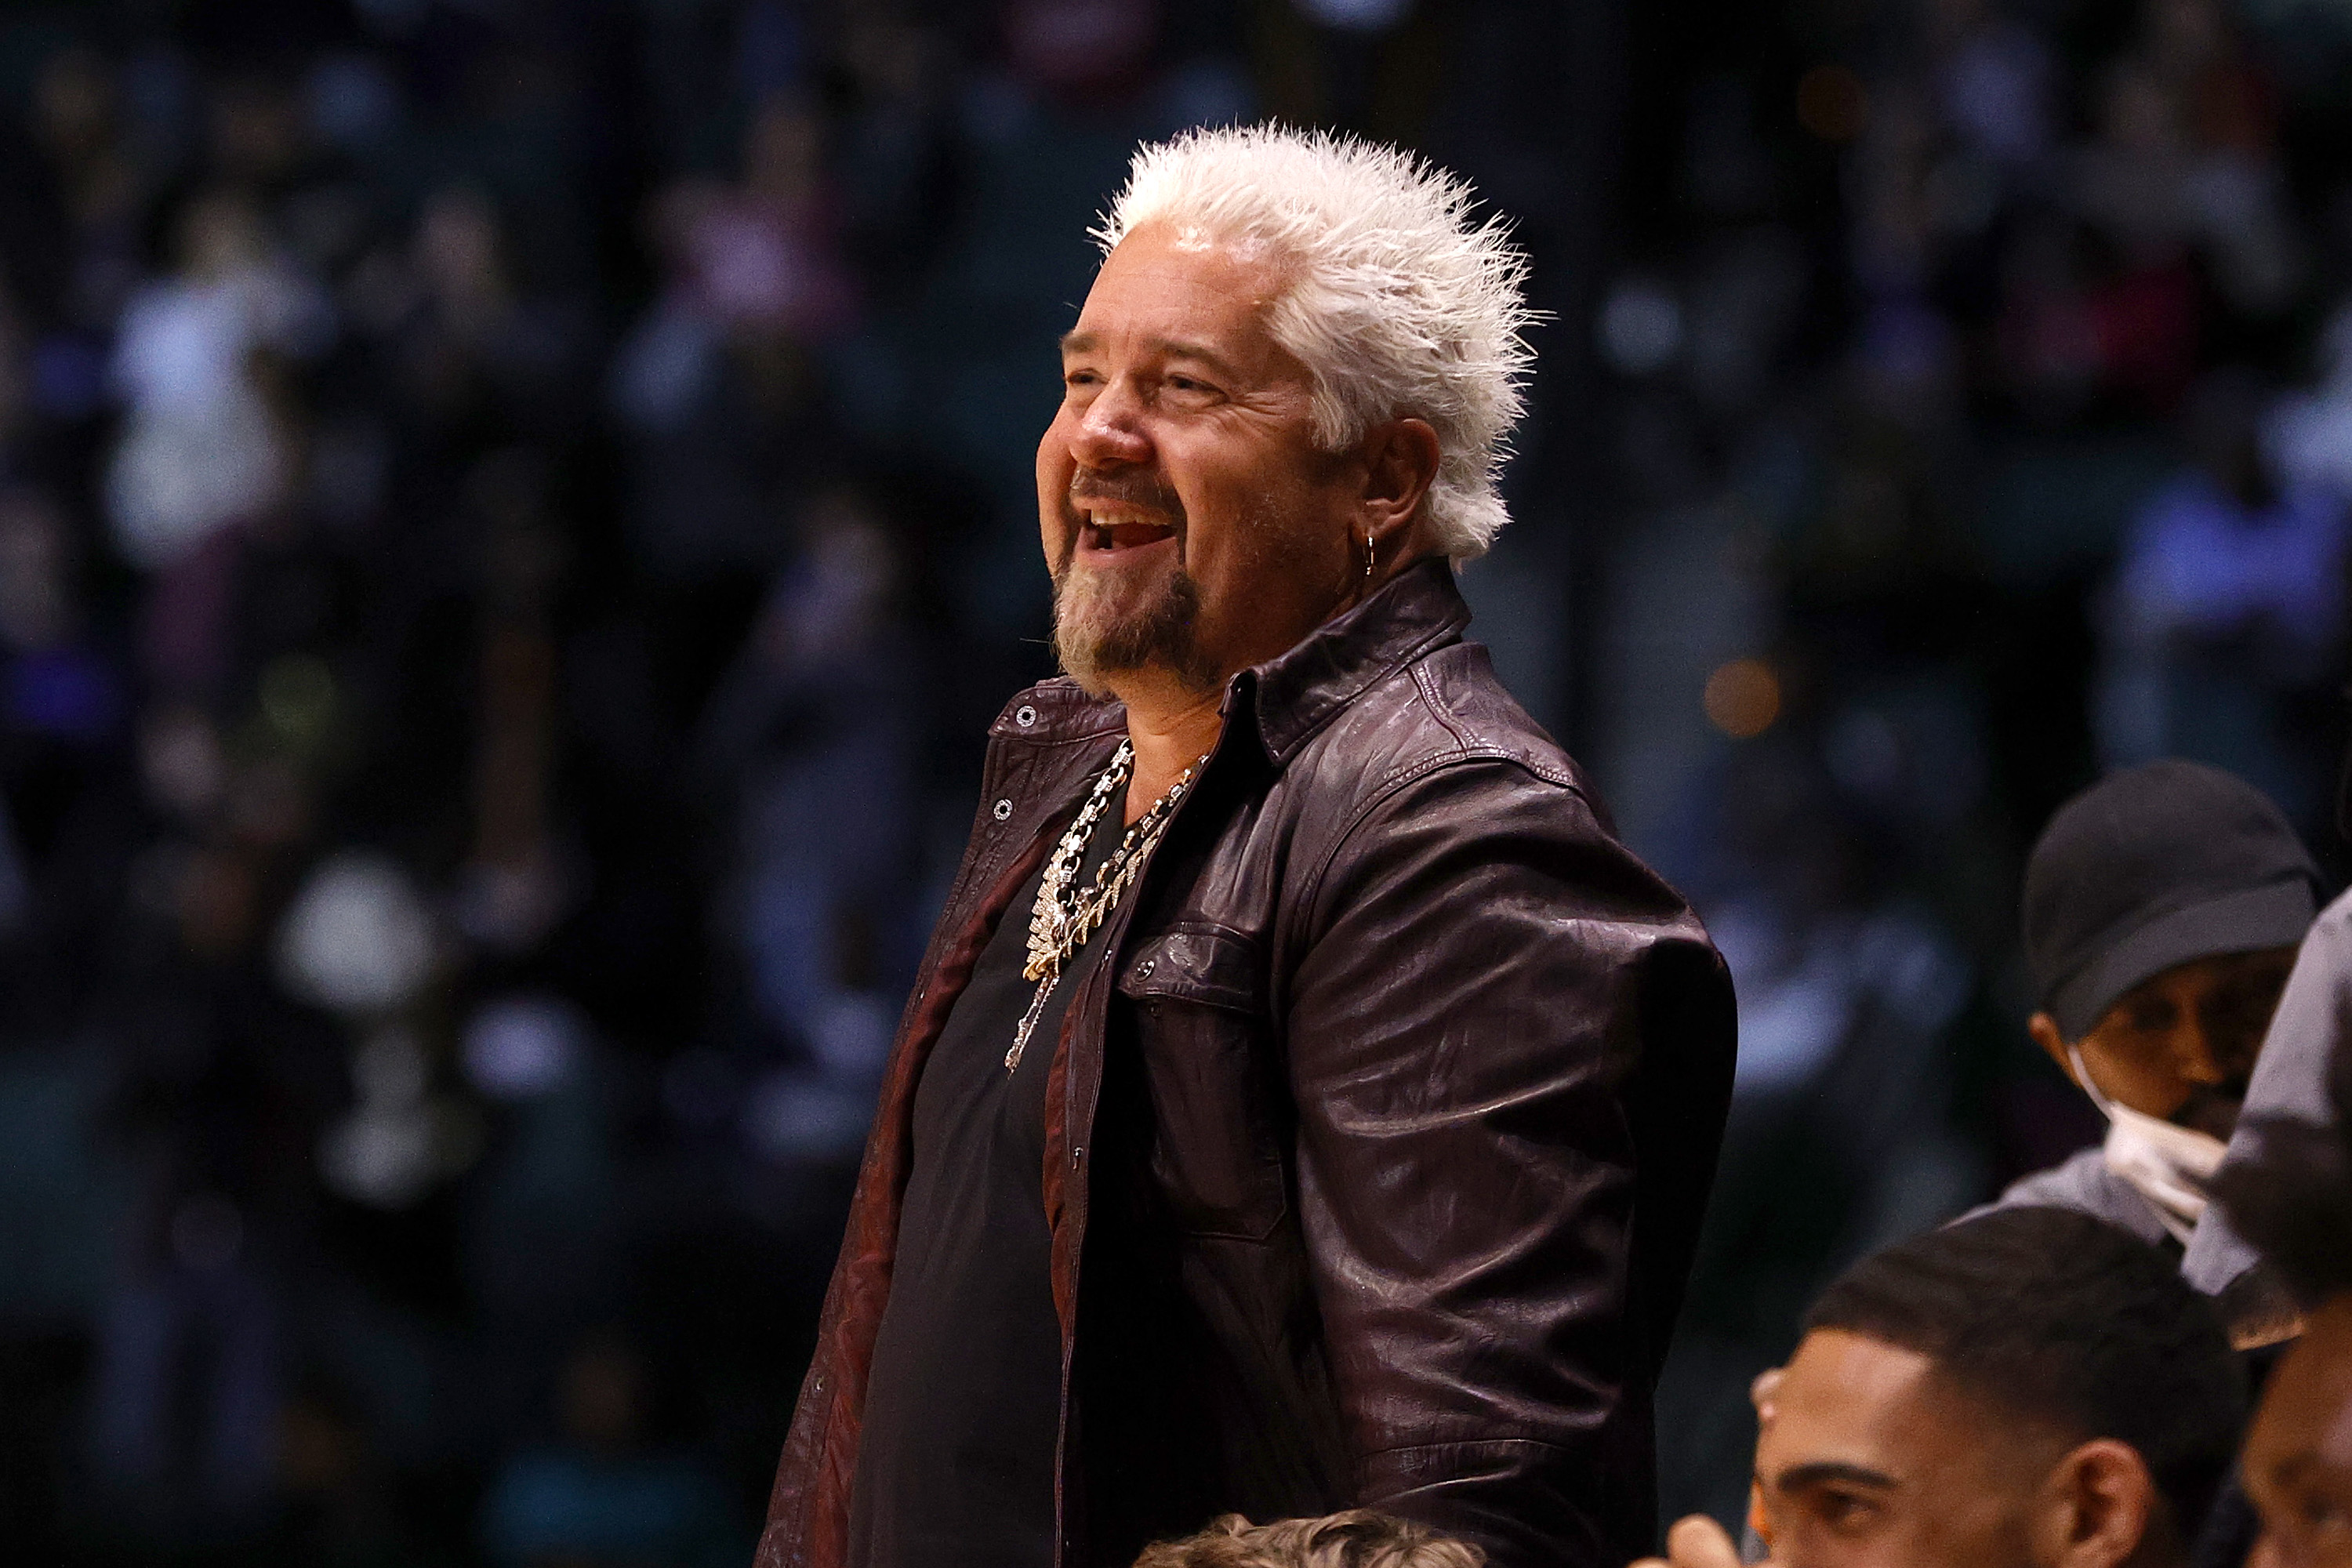 Man with blonde spiky hair and leather jacket smiles.